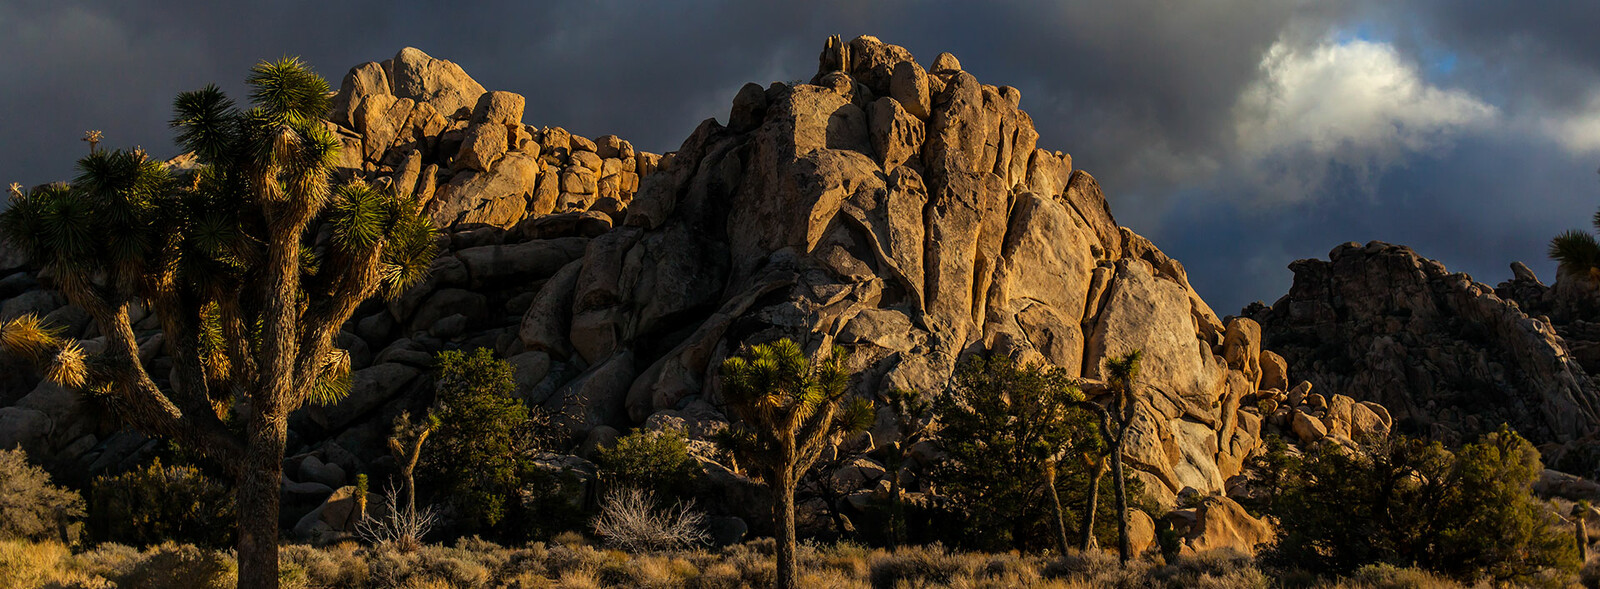 Photography light and color exploration in California desert.